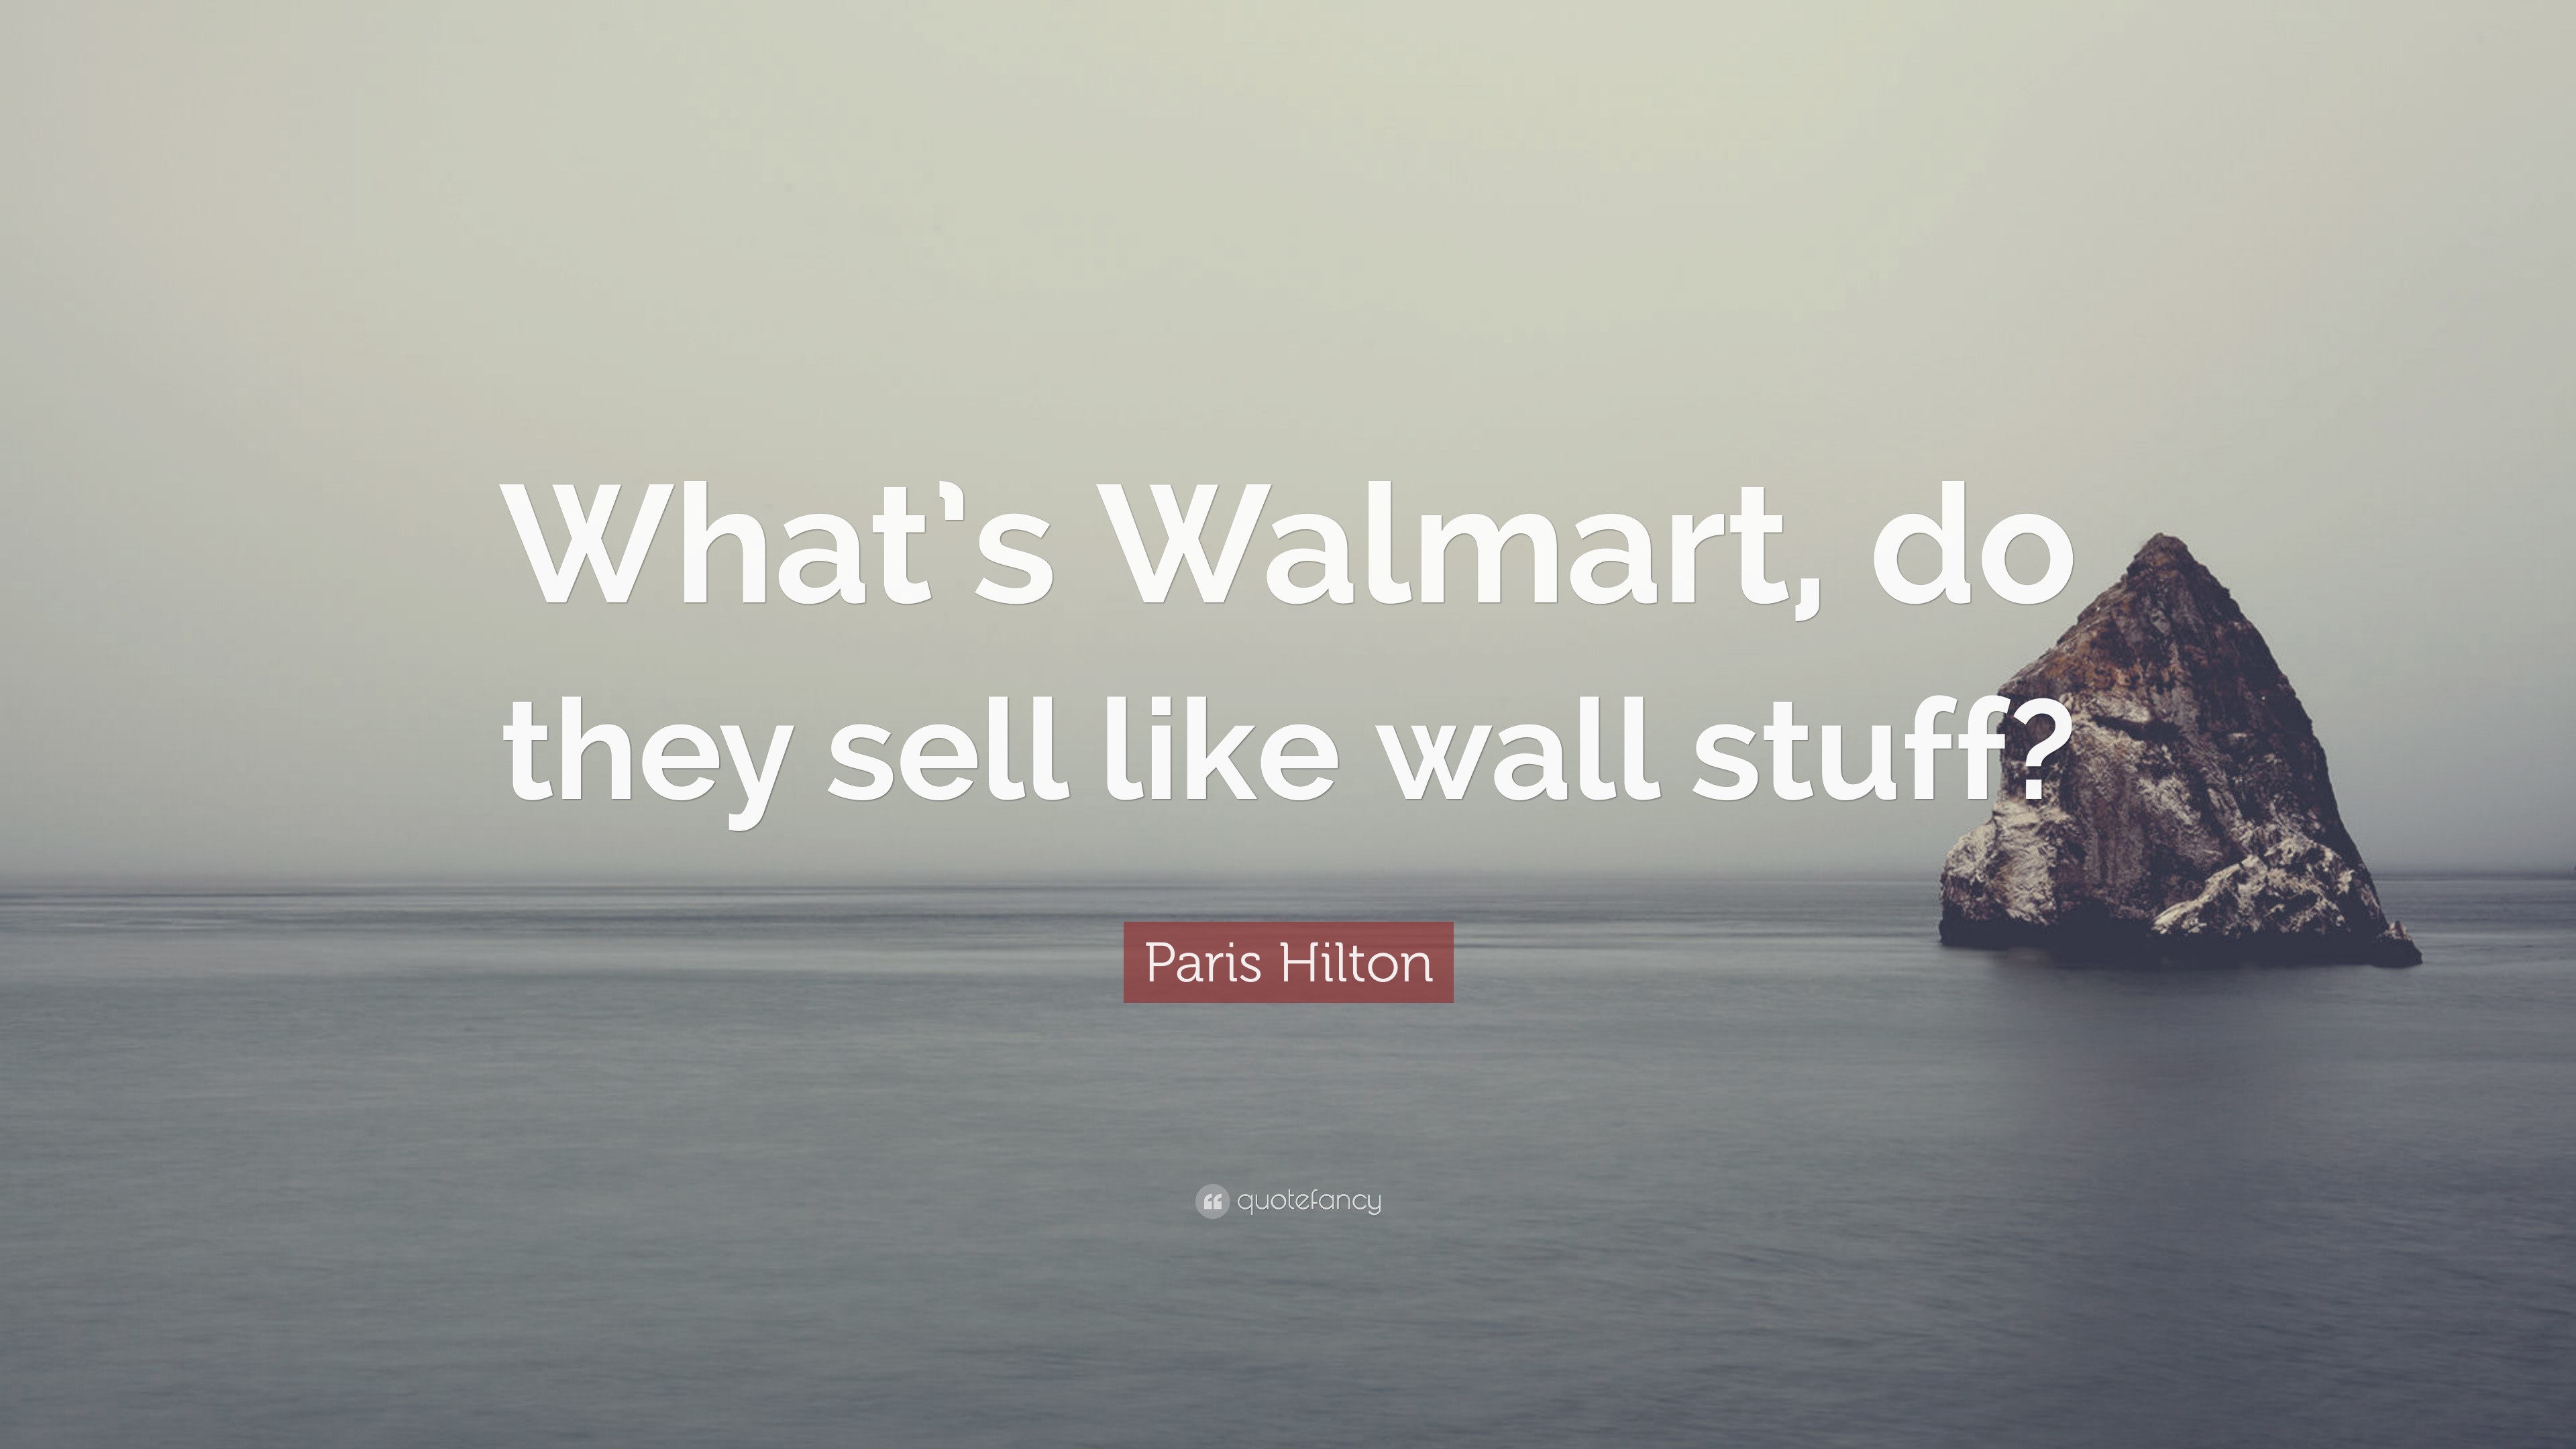 https://quotefancy.com/media/wallpaper/3840x2160/2259900-Paris-Hilton-Quote-What-s-Walmart-do-they-sell-like-wall-stuff.jpg